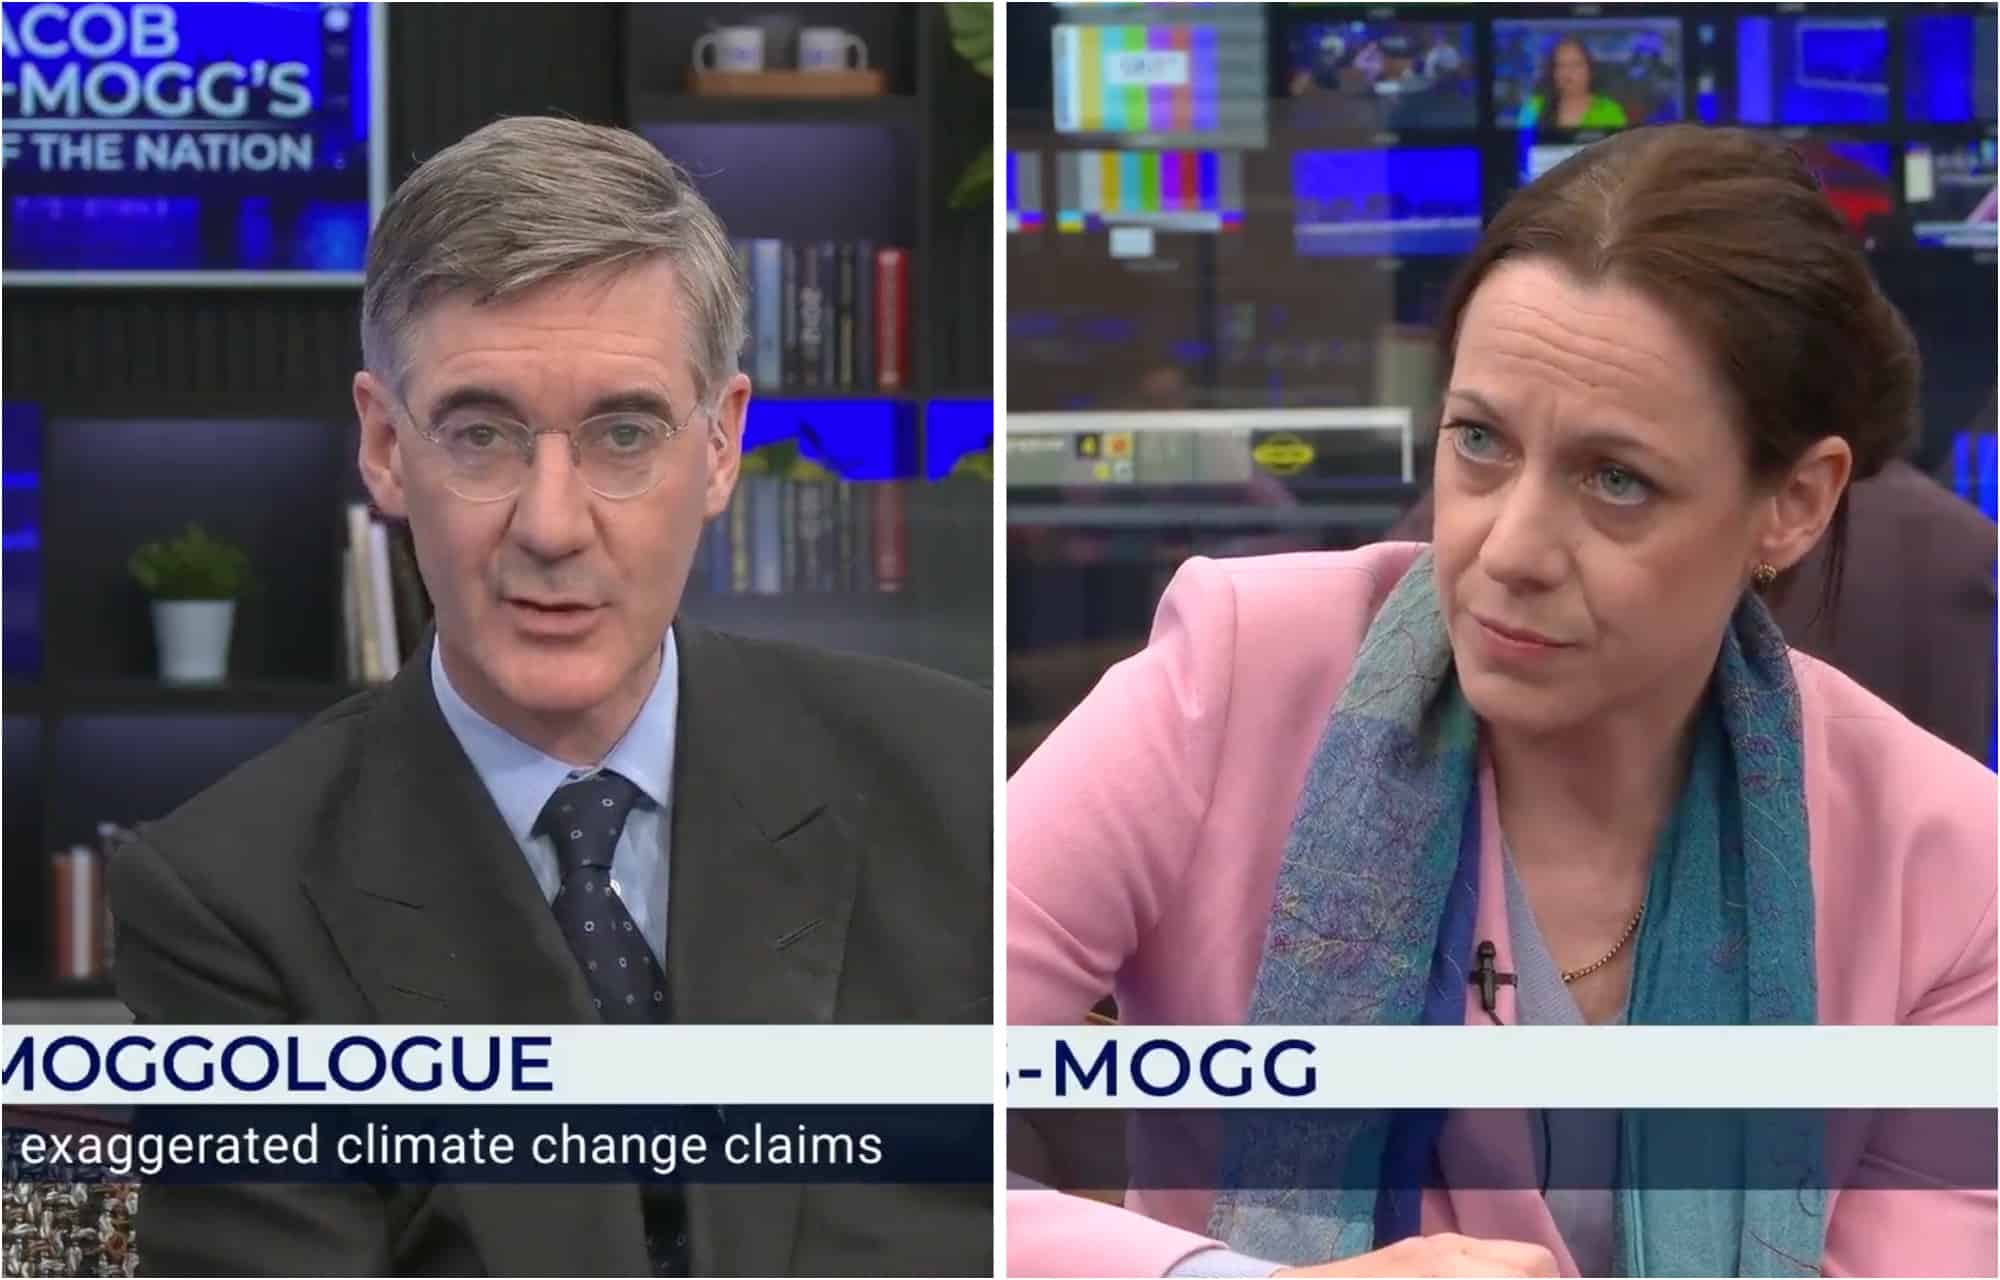 Jacob Rees-Mogg invites his SISTER onto GB News to spew climate change denial theories